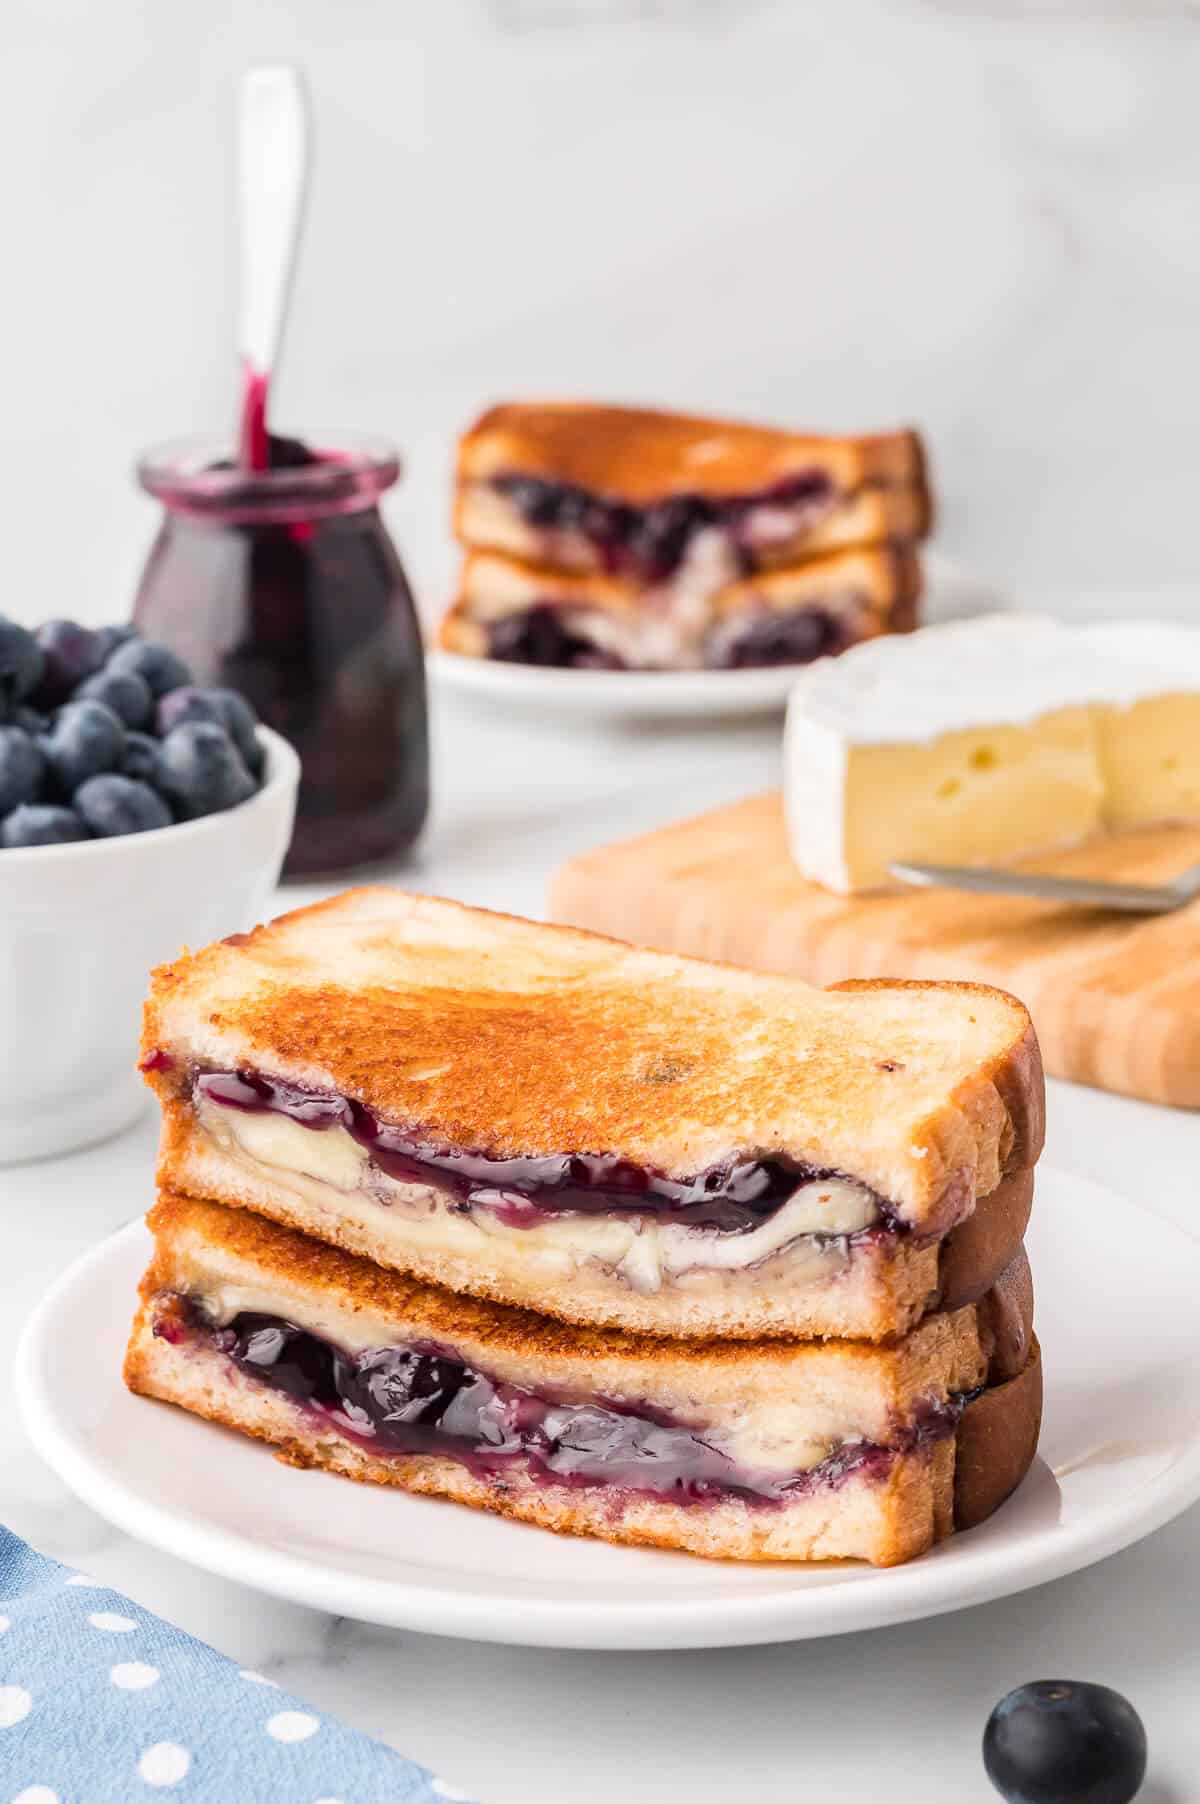 A blueberry brie grilled cheese sandwich on a plate.